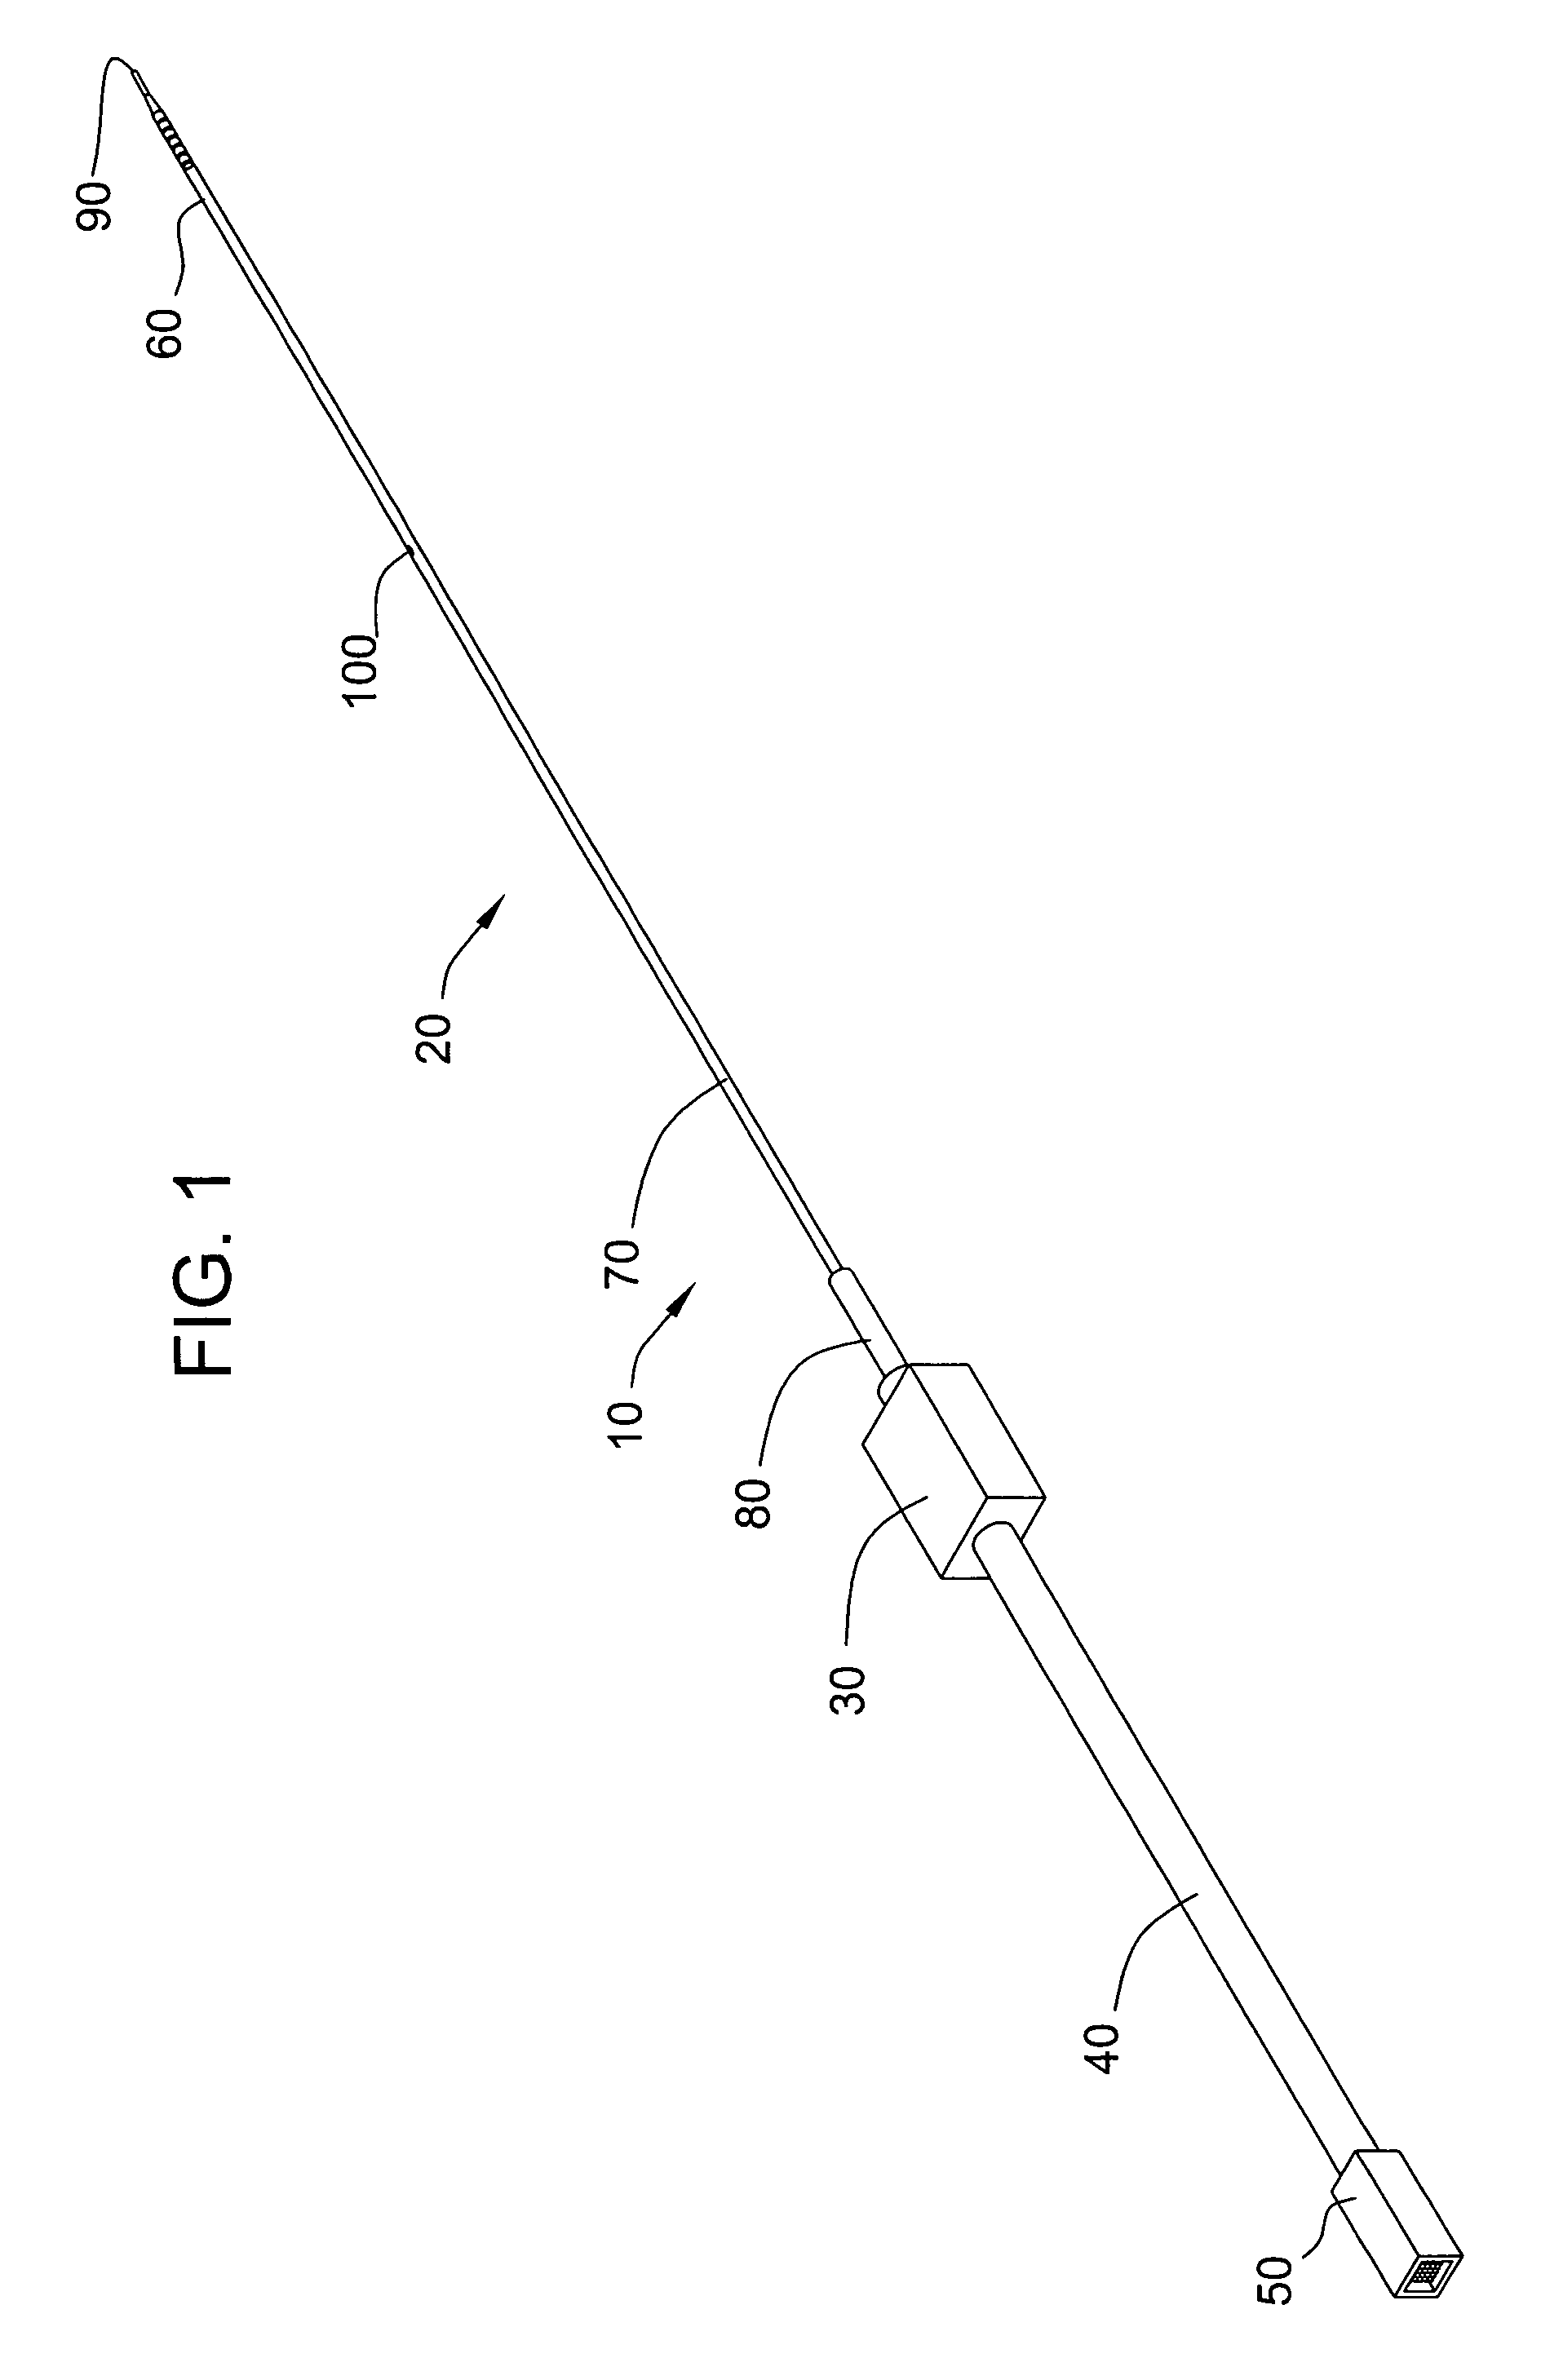 Capacitive microfabricated ultrasound transducer-based intravascular ultrasound probes